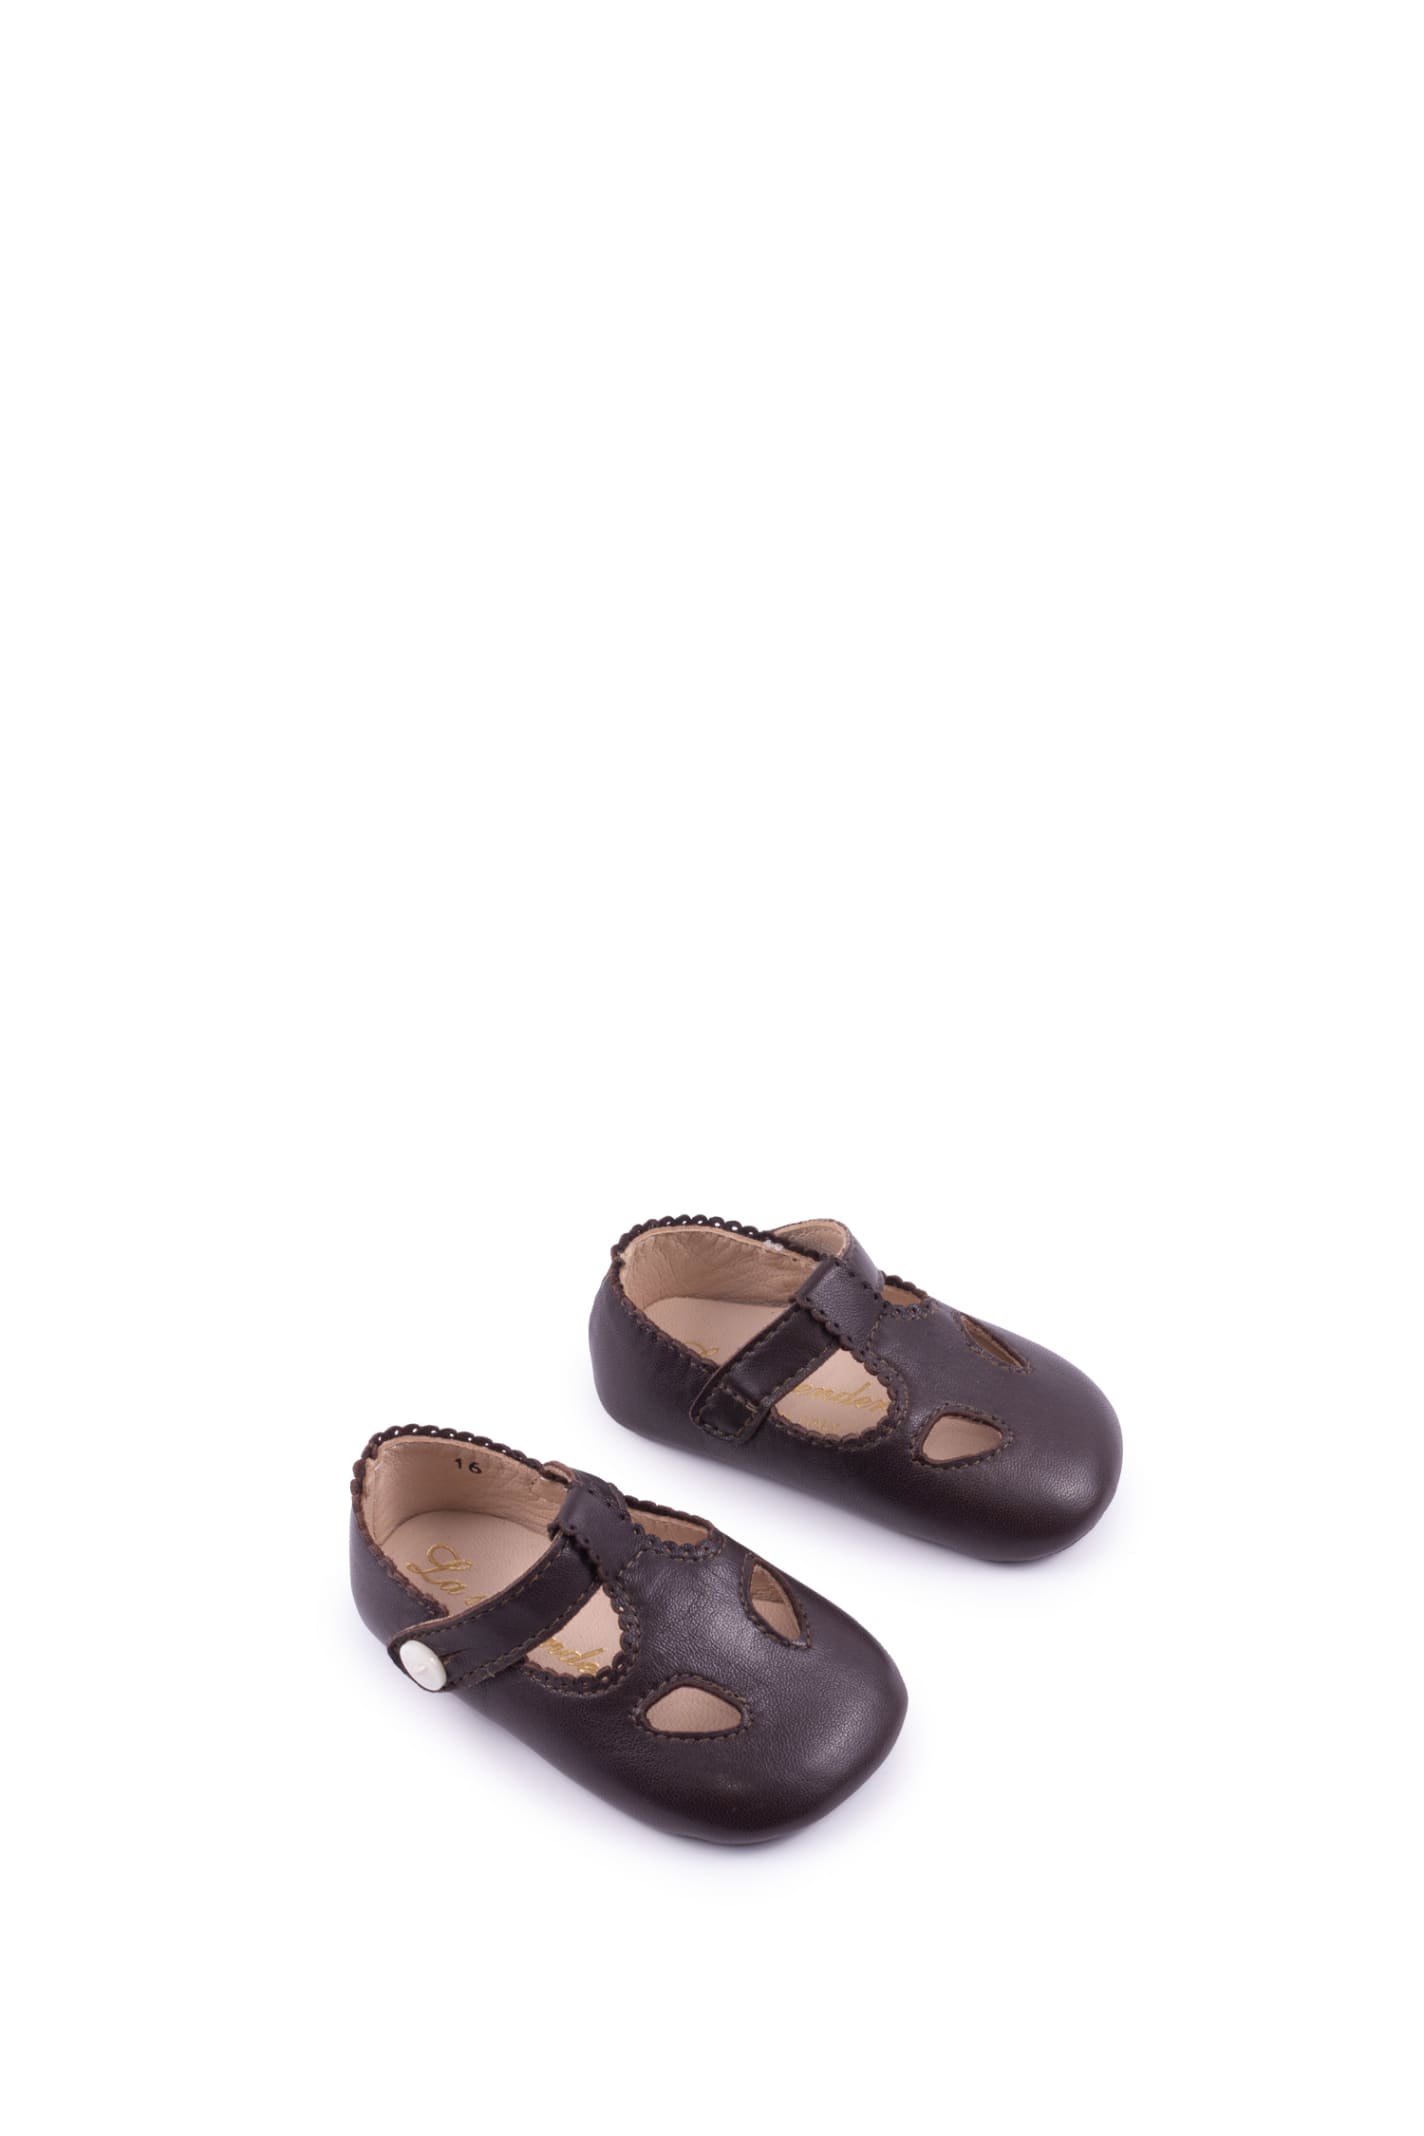 Shop La Stupenderia Leather Shoes In Brown